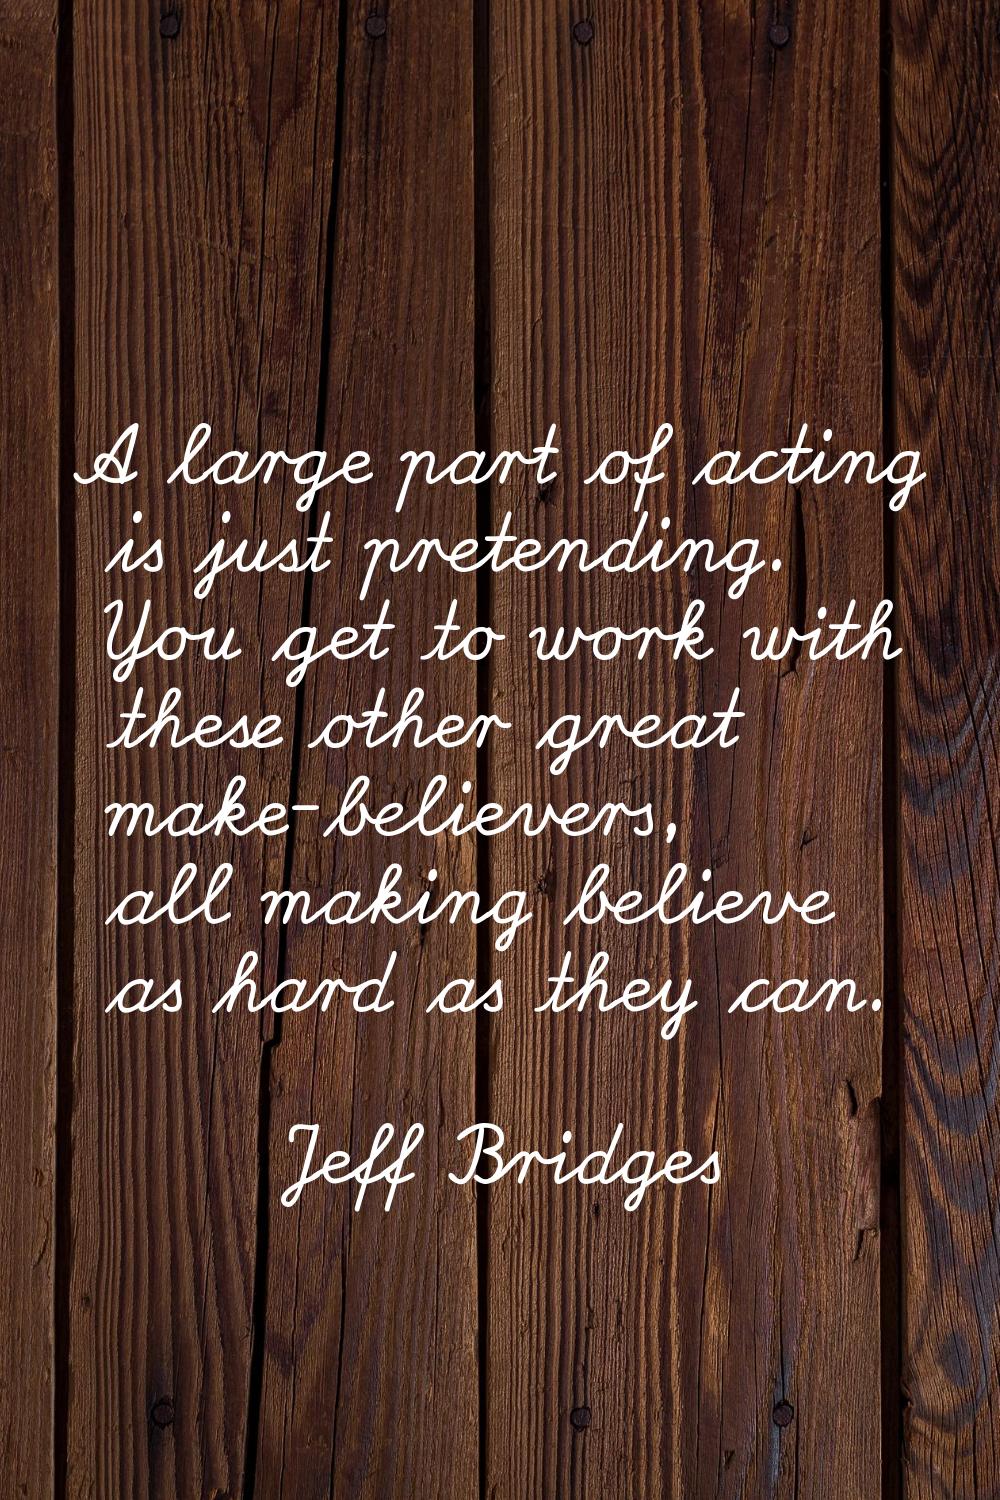 A large part of acting is just pretending. You get to work with these other great make-believers, a